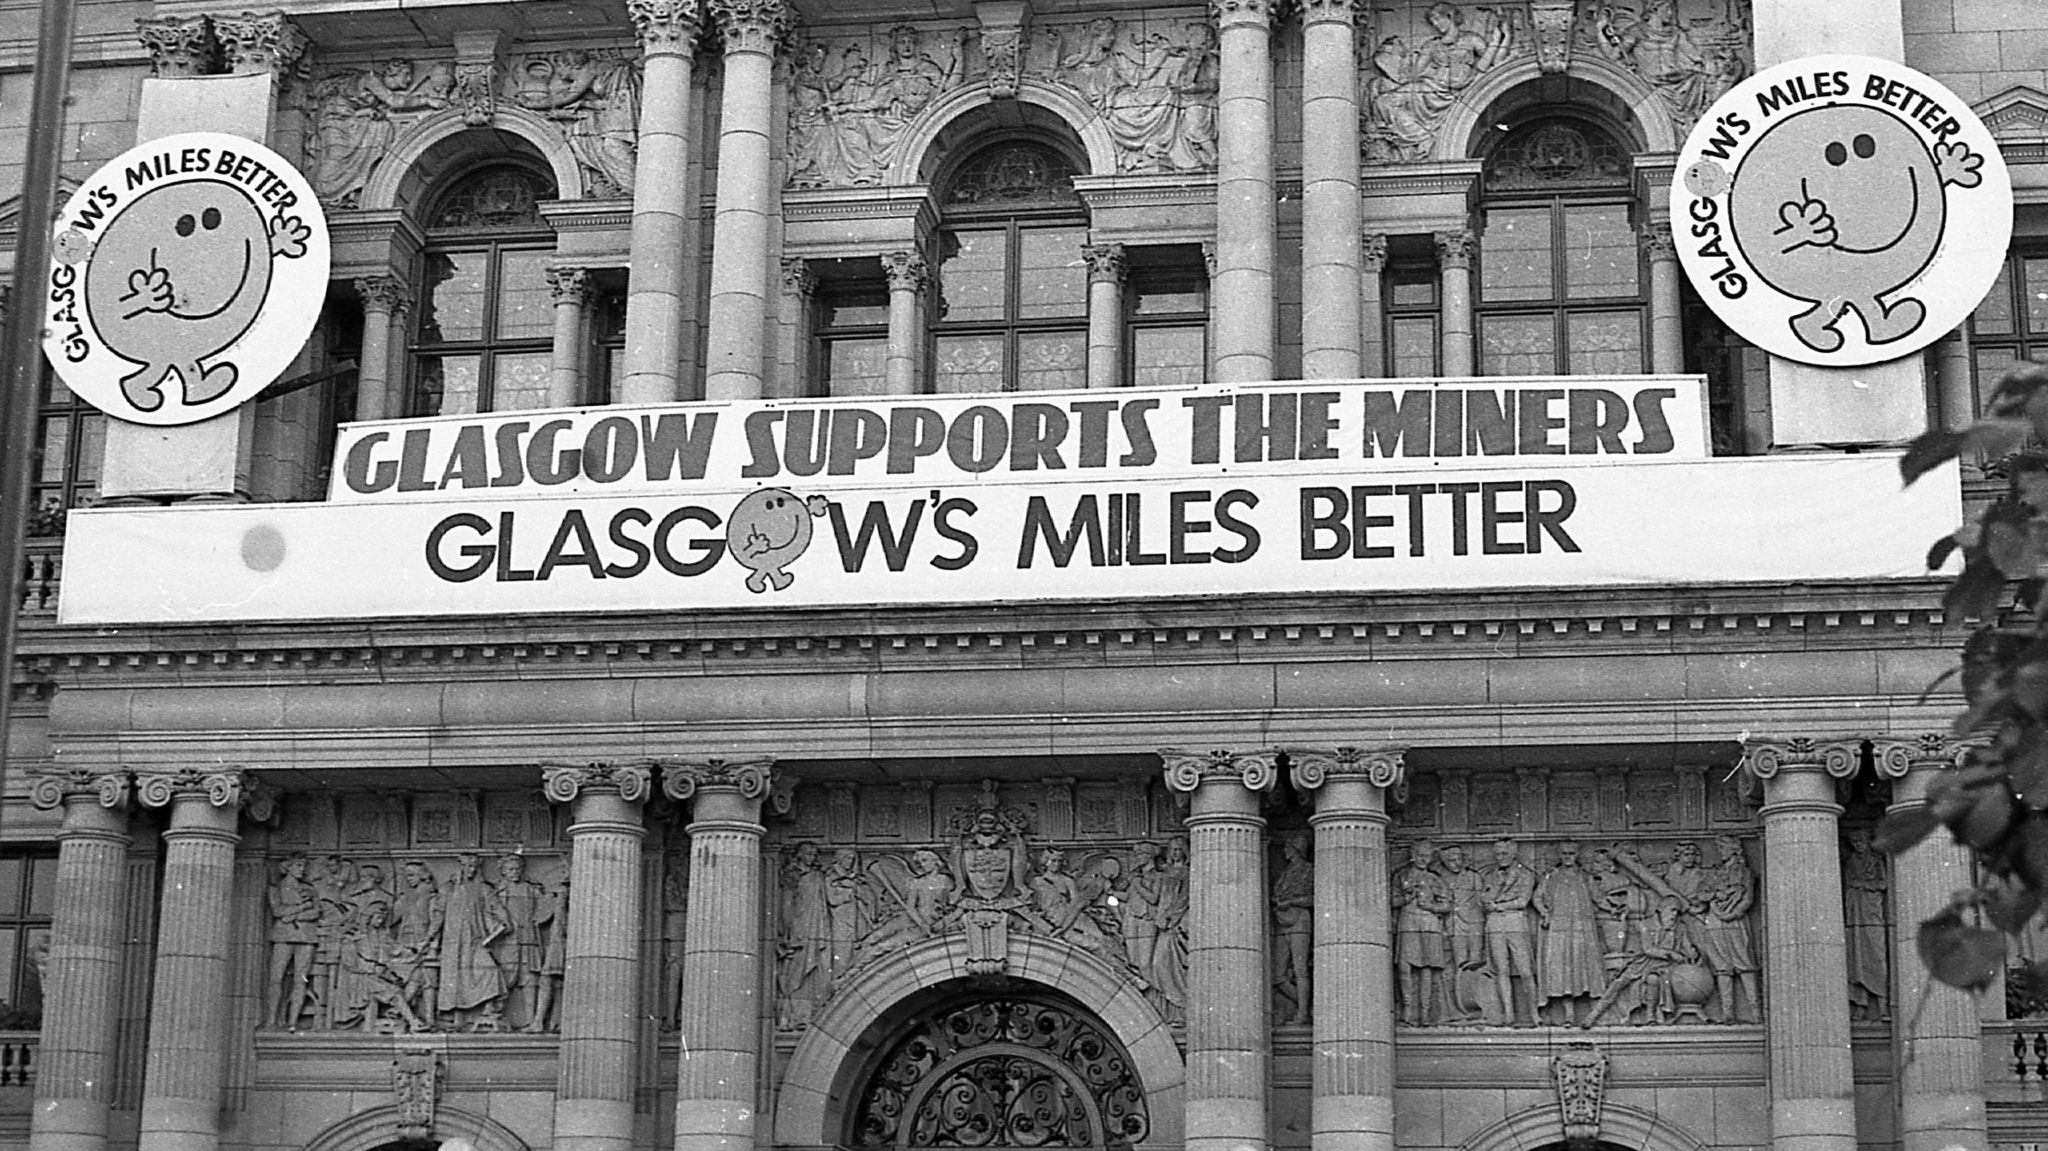 Glasgow supports the miners sign